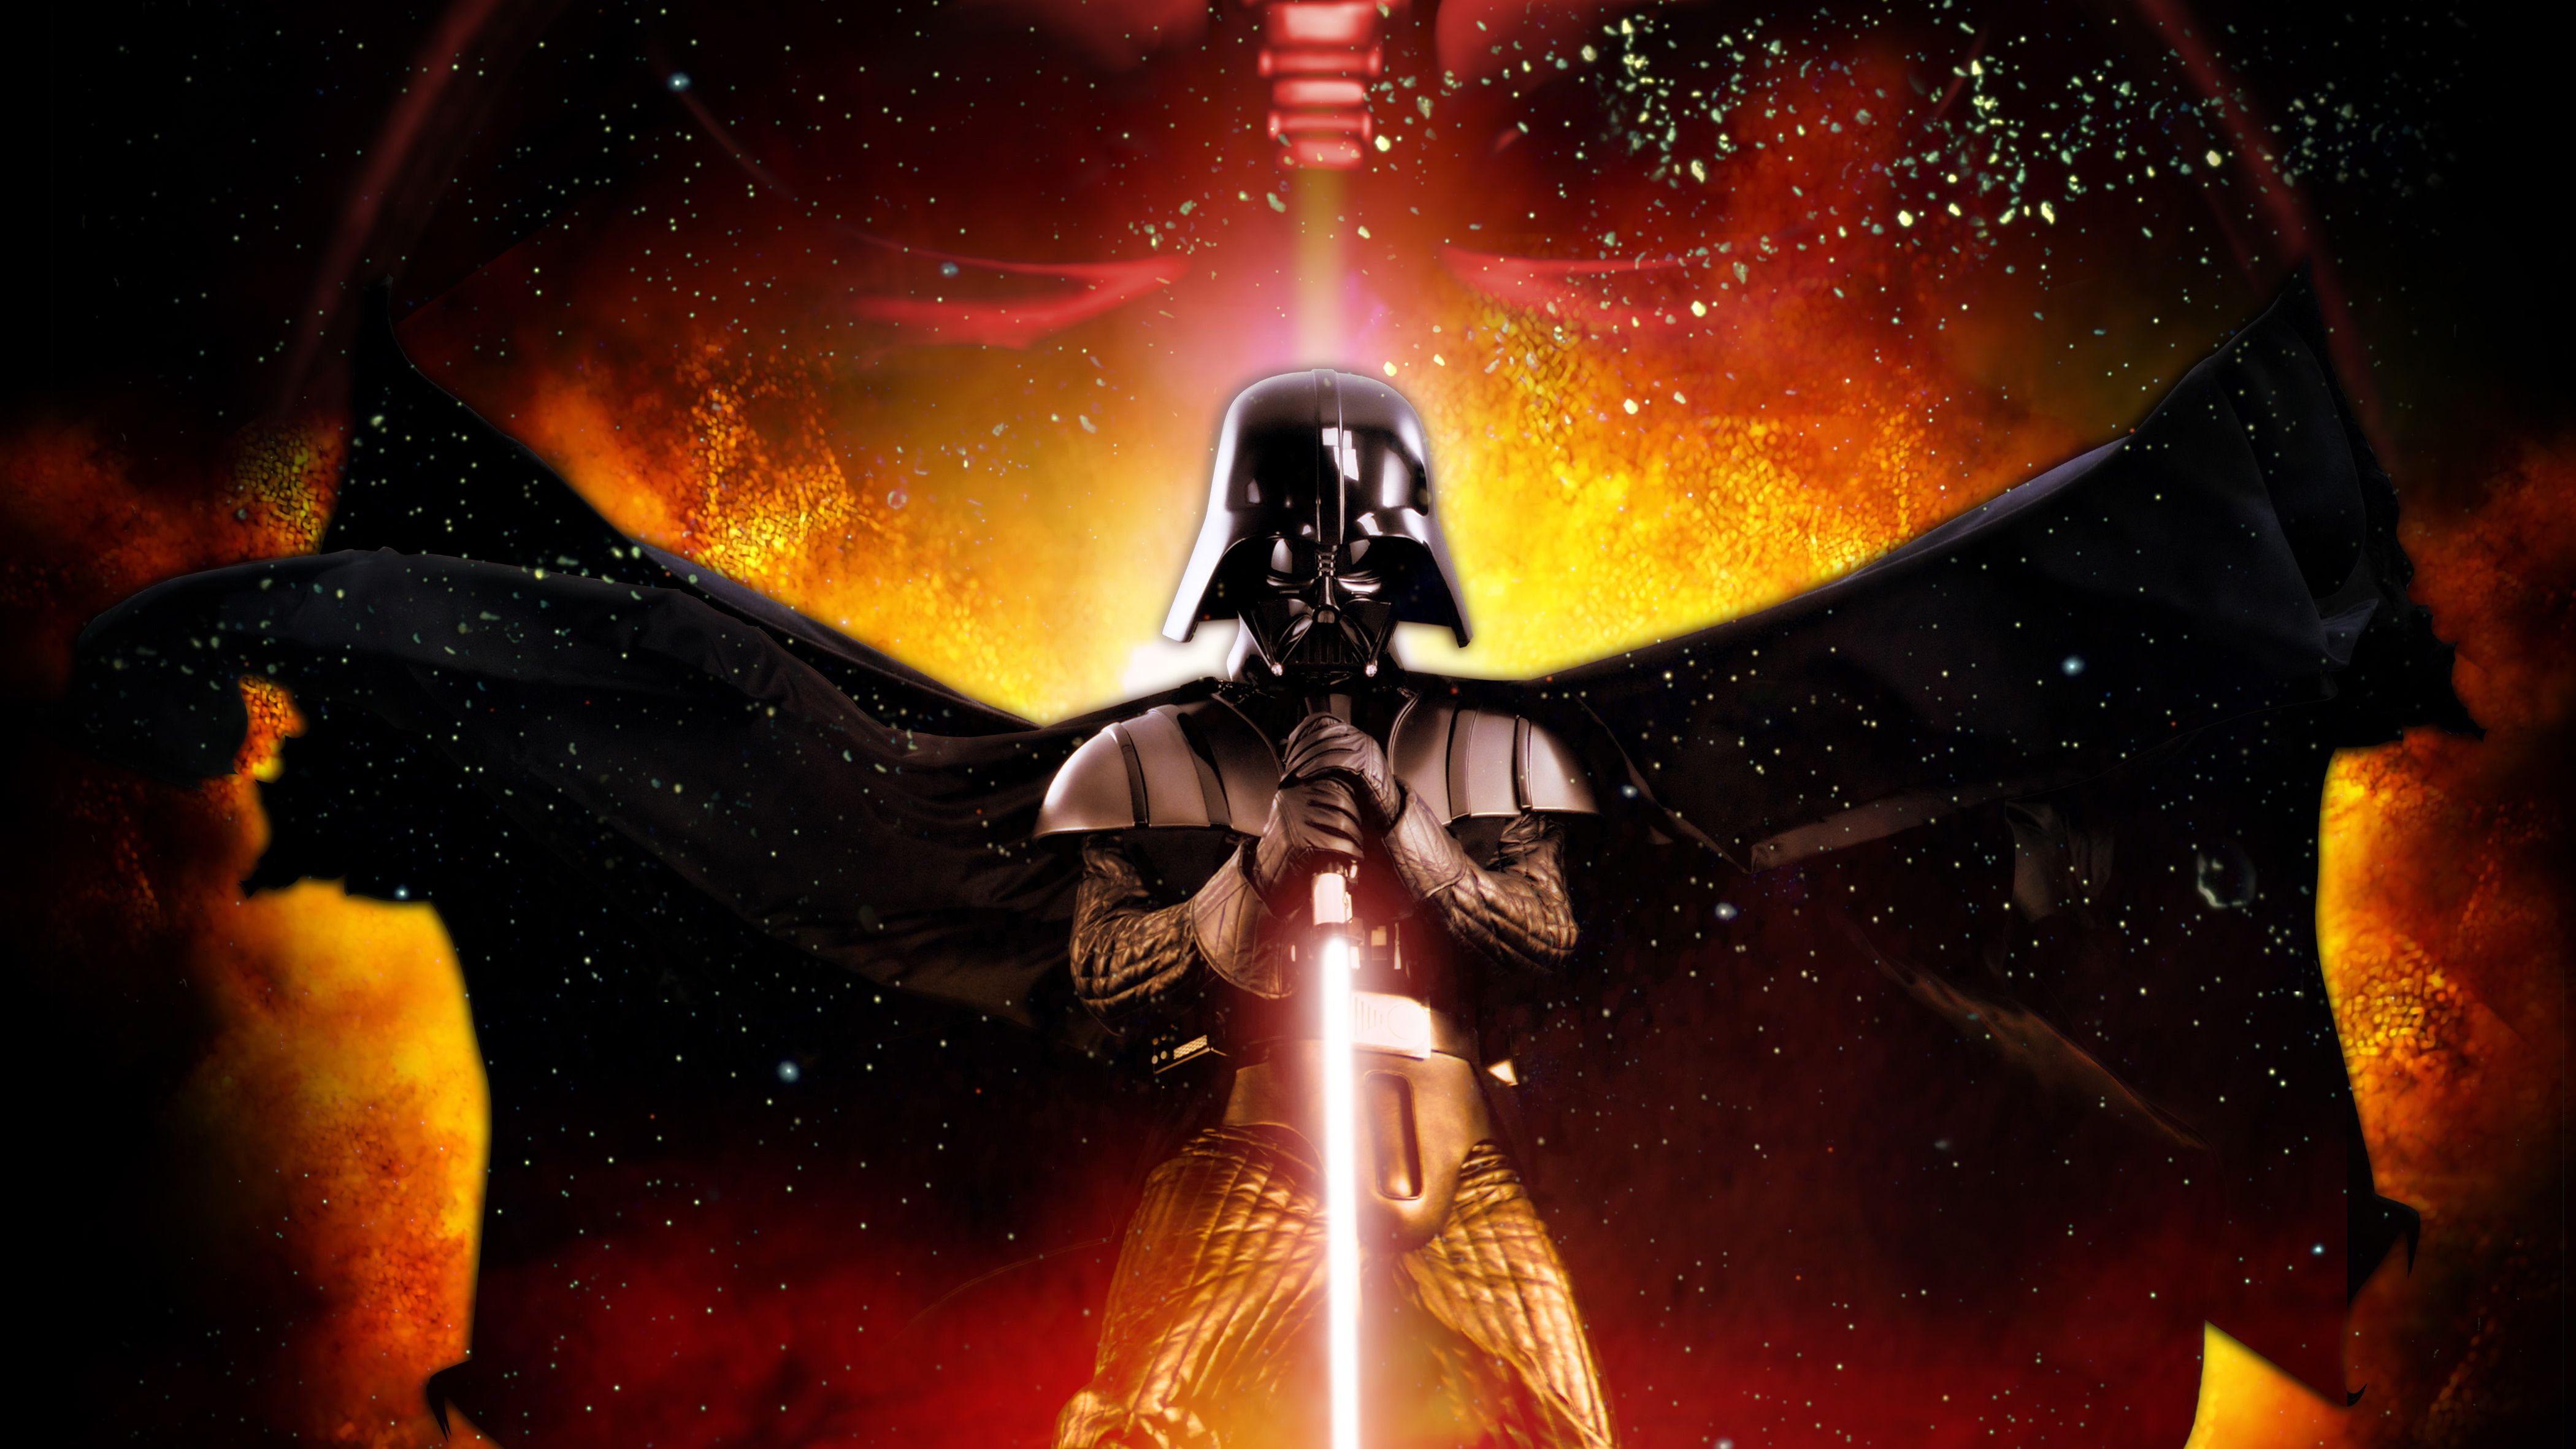 Darth Vader with Lightsaber Wallpaper, HD Movies 4K Wallpaper, Image, Photo and Background